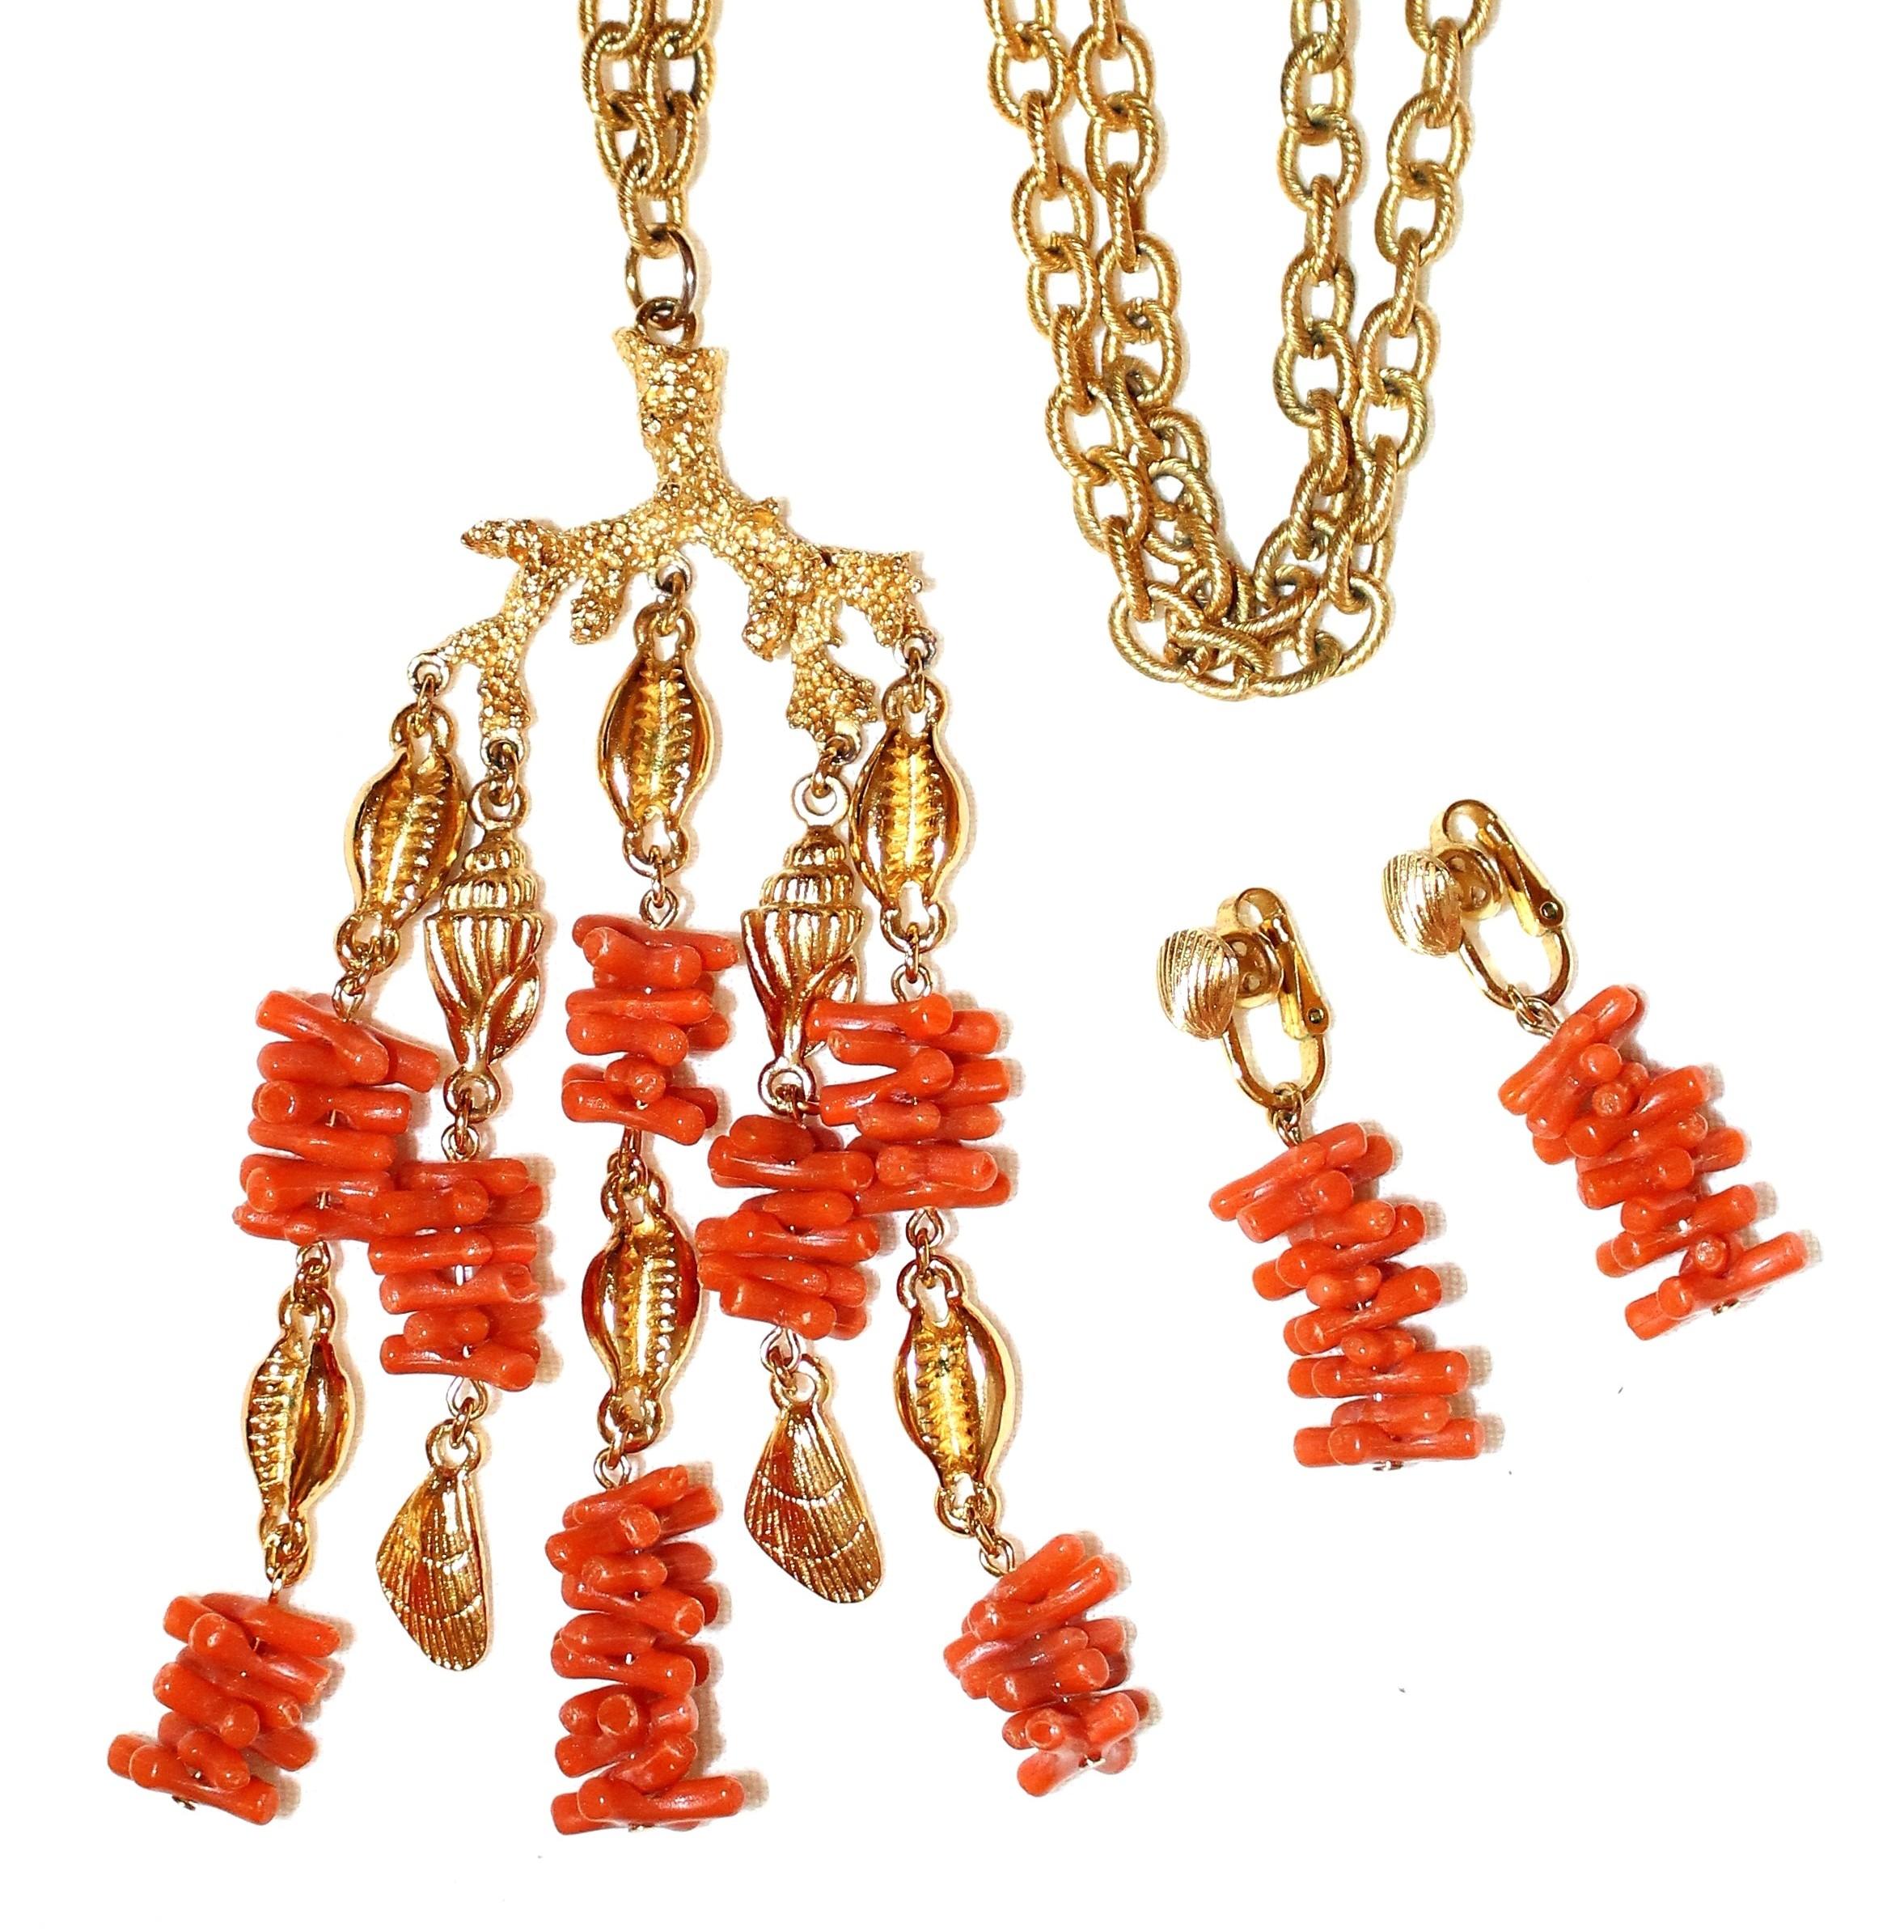 Circa 1960s Trifari Faux-Coral Necklace and Earrings Set im Zustand „Gut“ im Angebot in Long Beach, CA